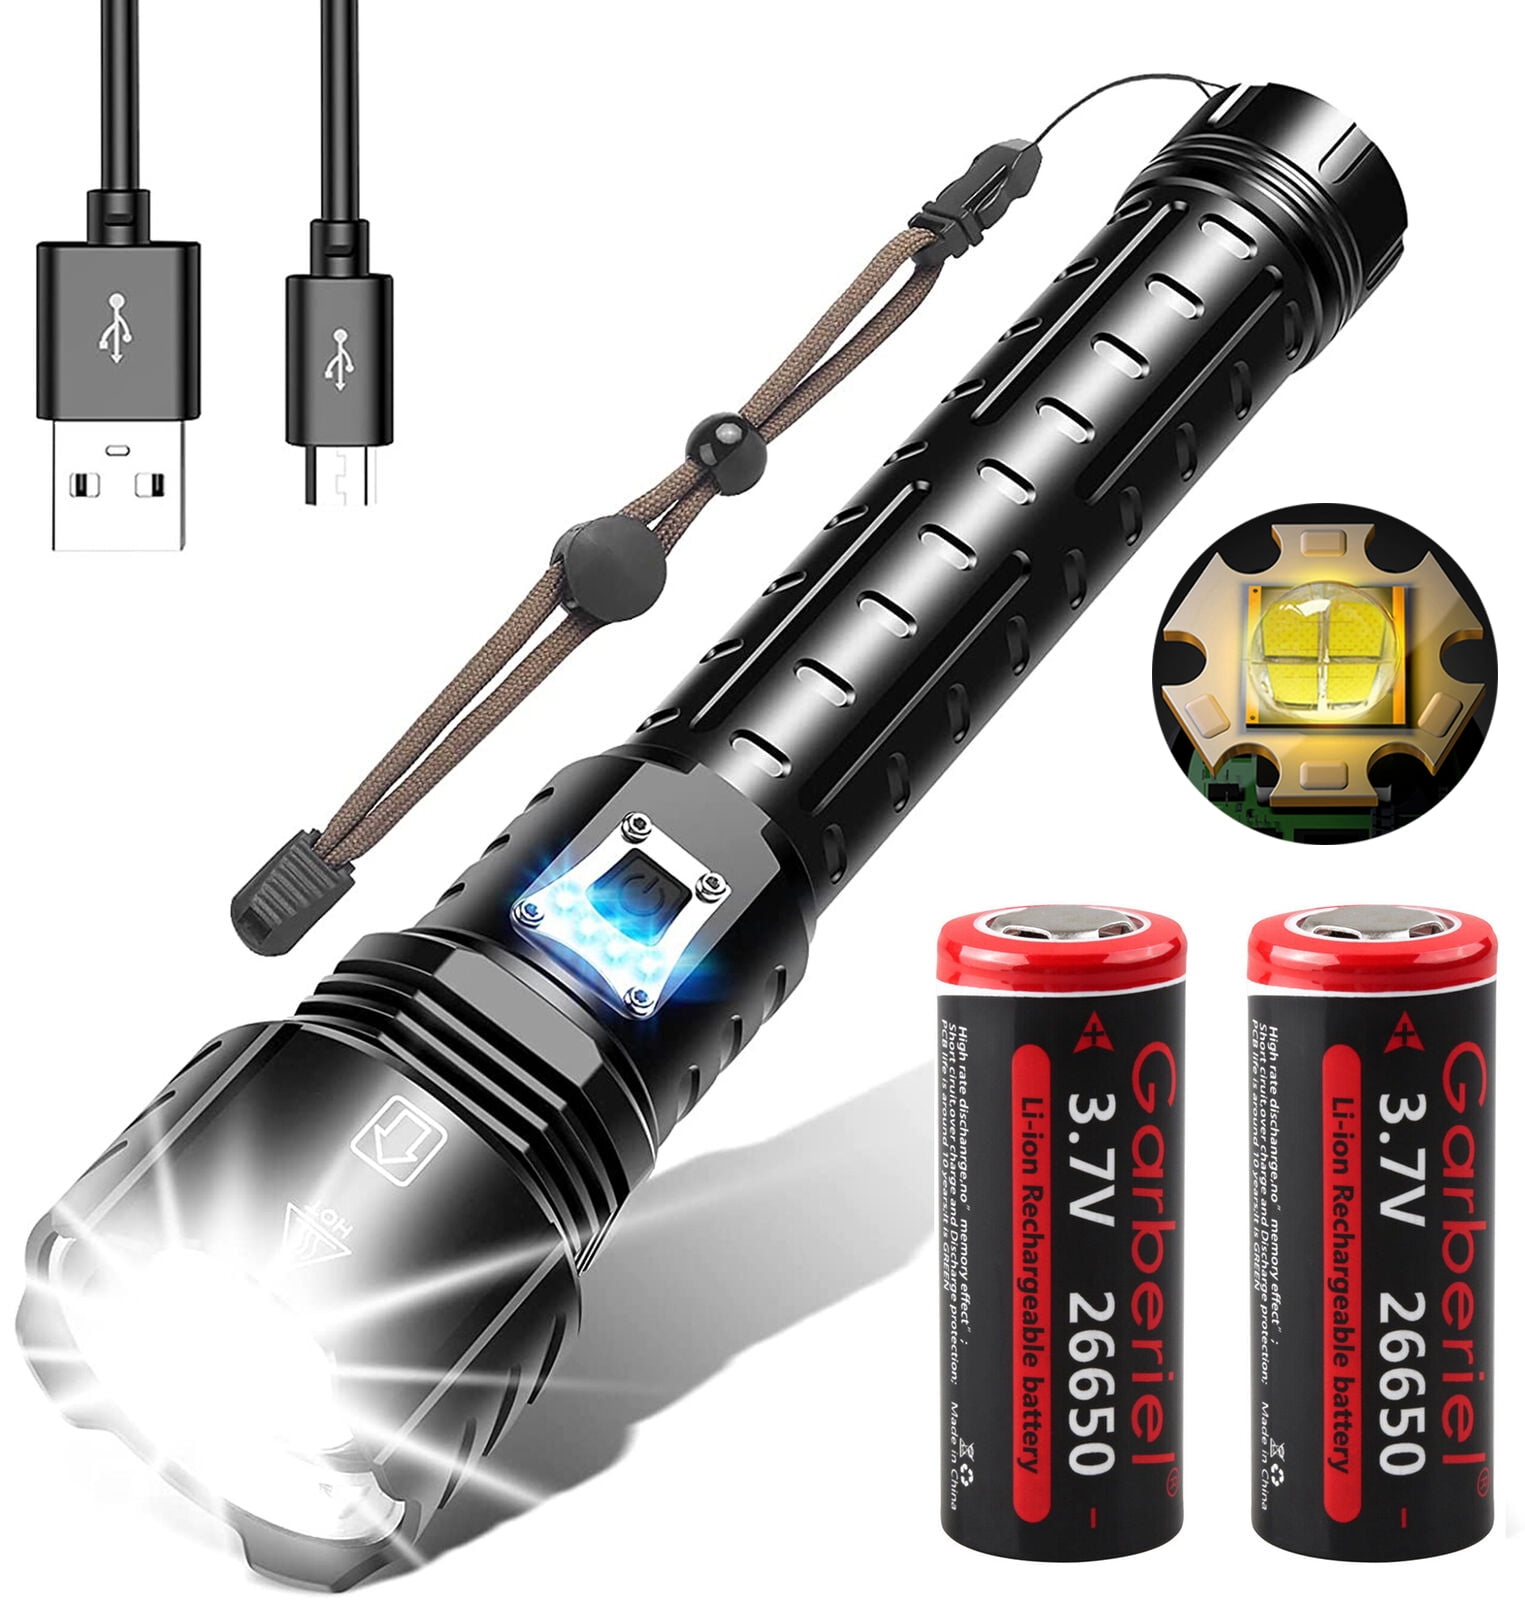 Garberiel XHP90.2 Super Bright 26650 120000Lumens Waterproof for Hiking Flashlight LED Tactical Rechargeable USB Zoom Torch with 2PCS Batteries Camping